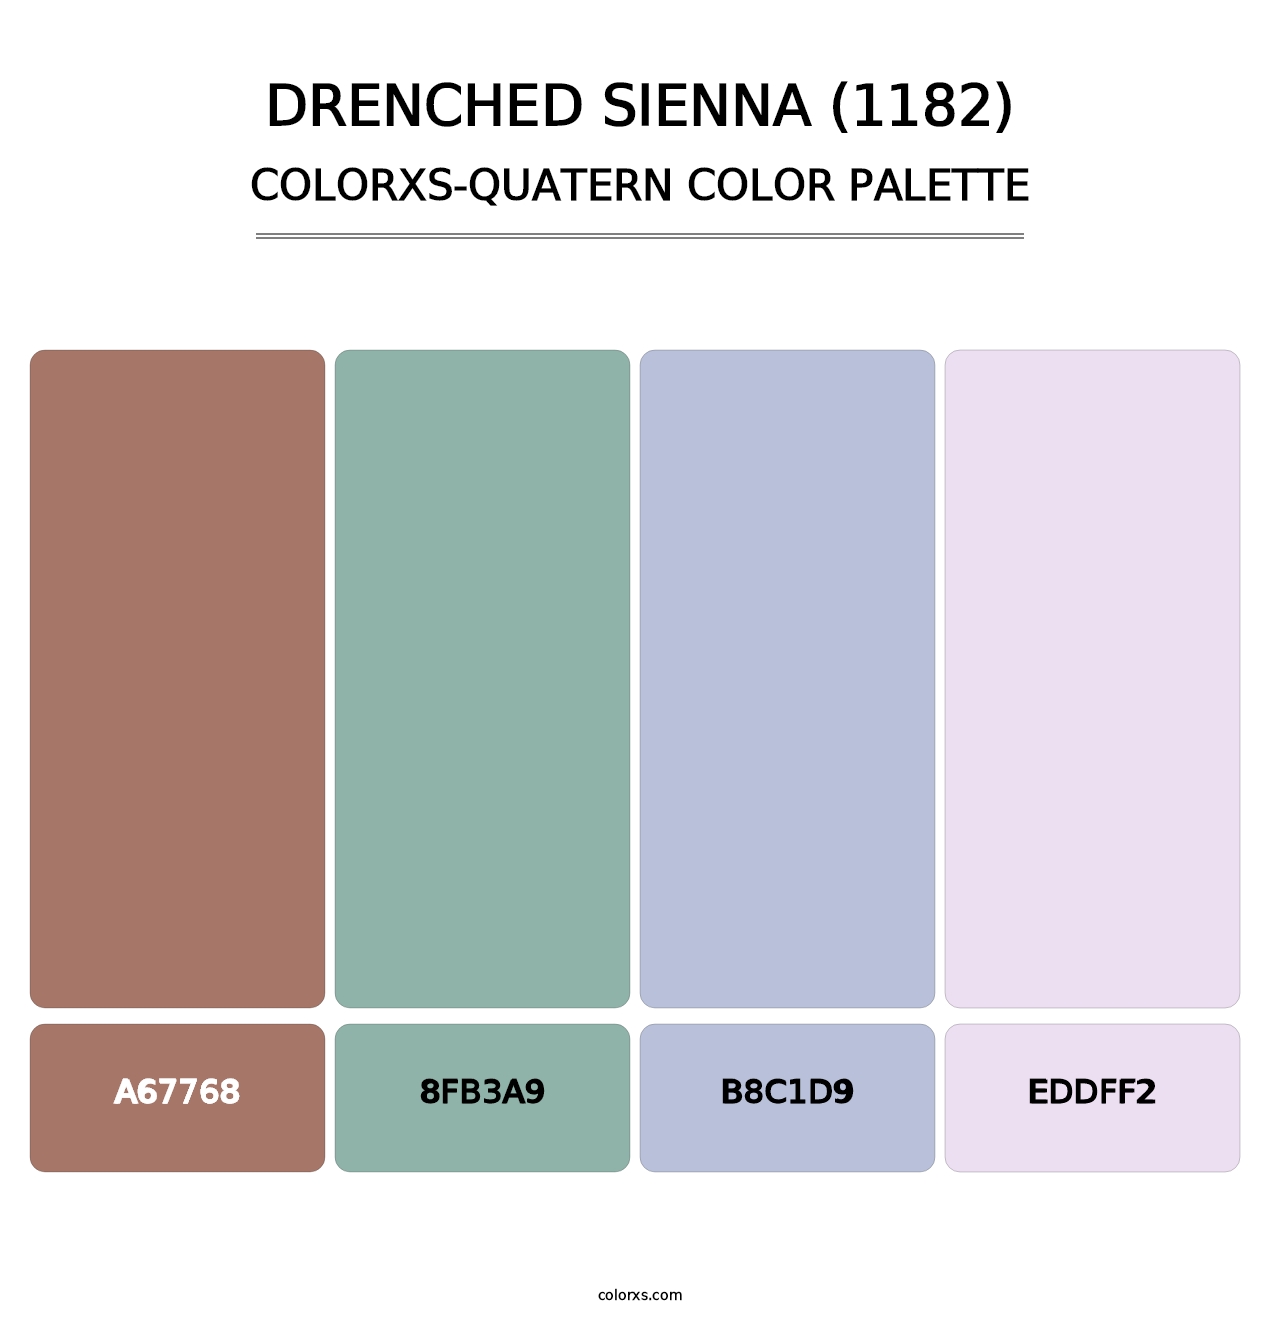 Drenched Sienna (1182) - Colorxs Quatern Palette